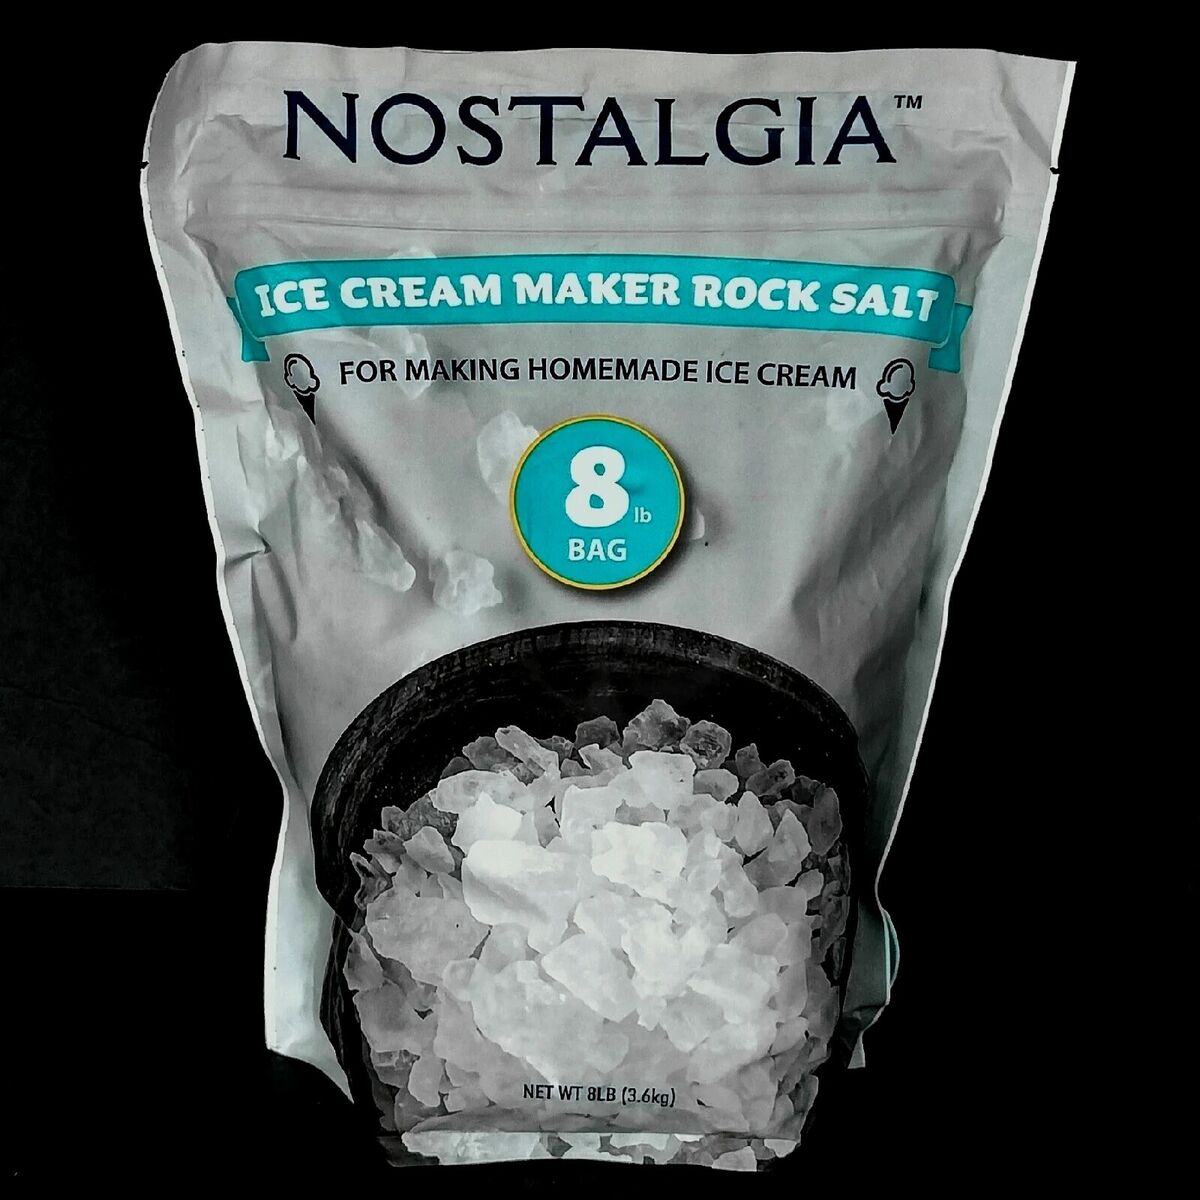 What Do I Need To Use Ice Cream Maker Rock Salt